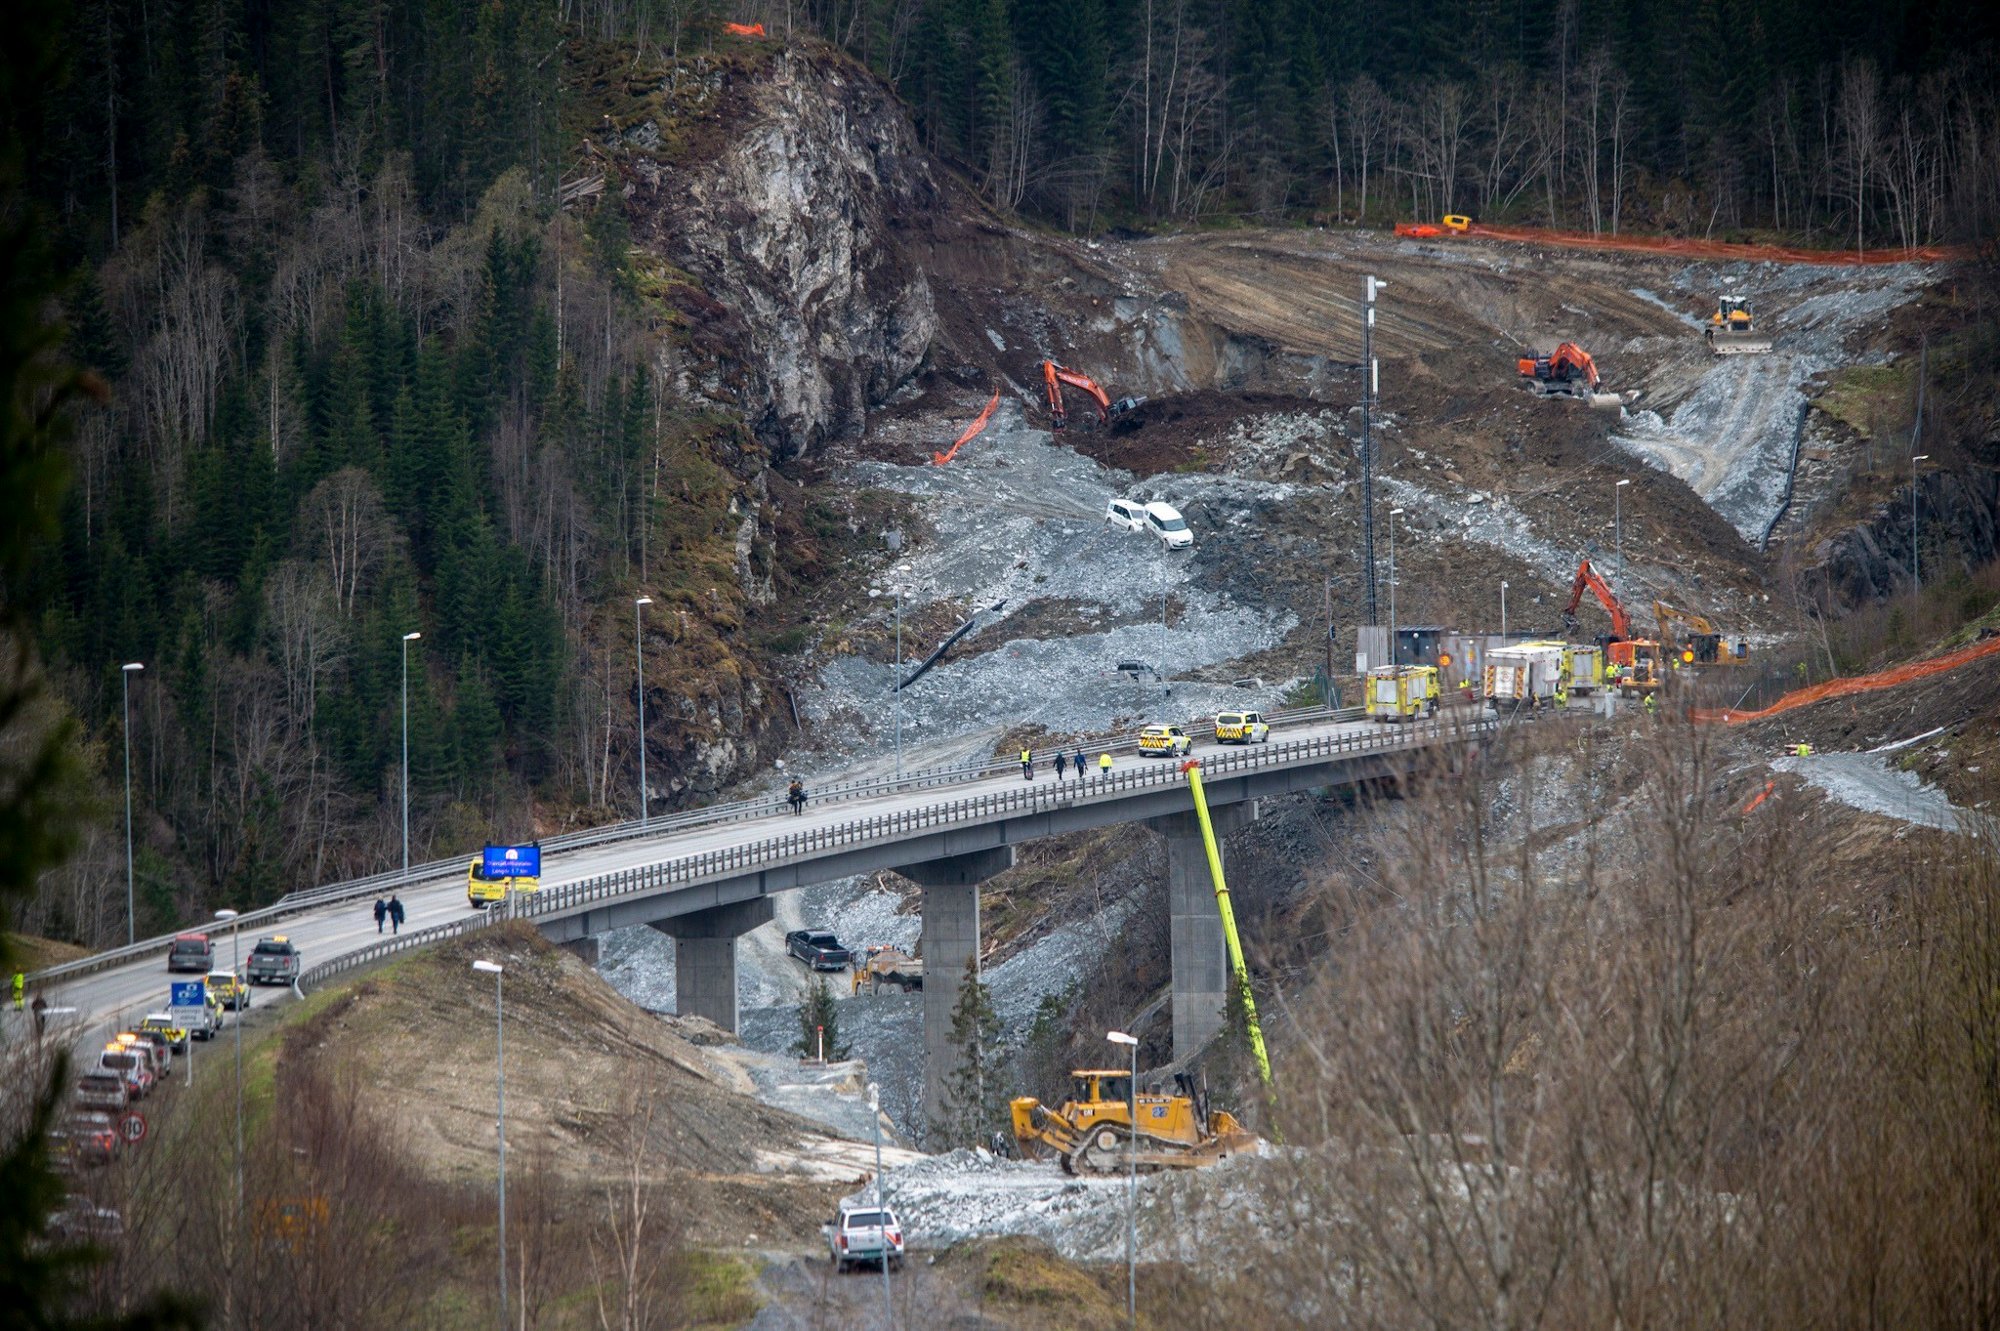 The aftermath of the landslide at Malvik in Norway on 4 May 2022